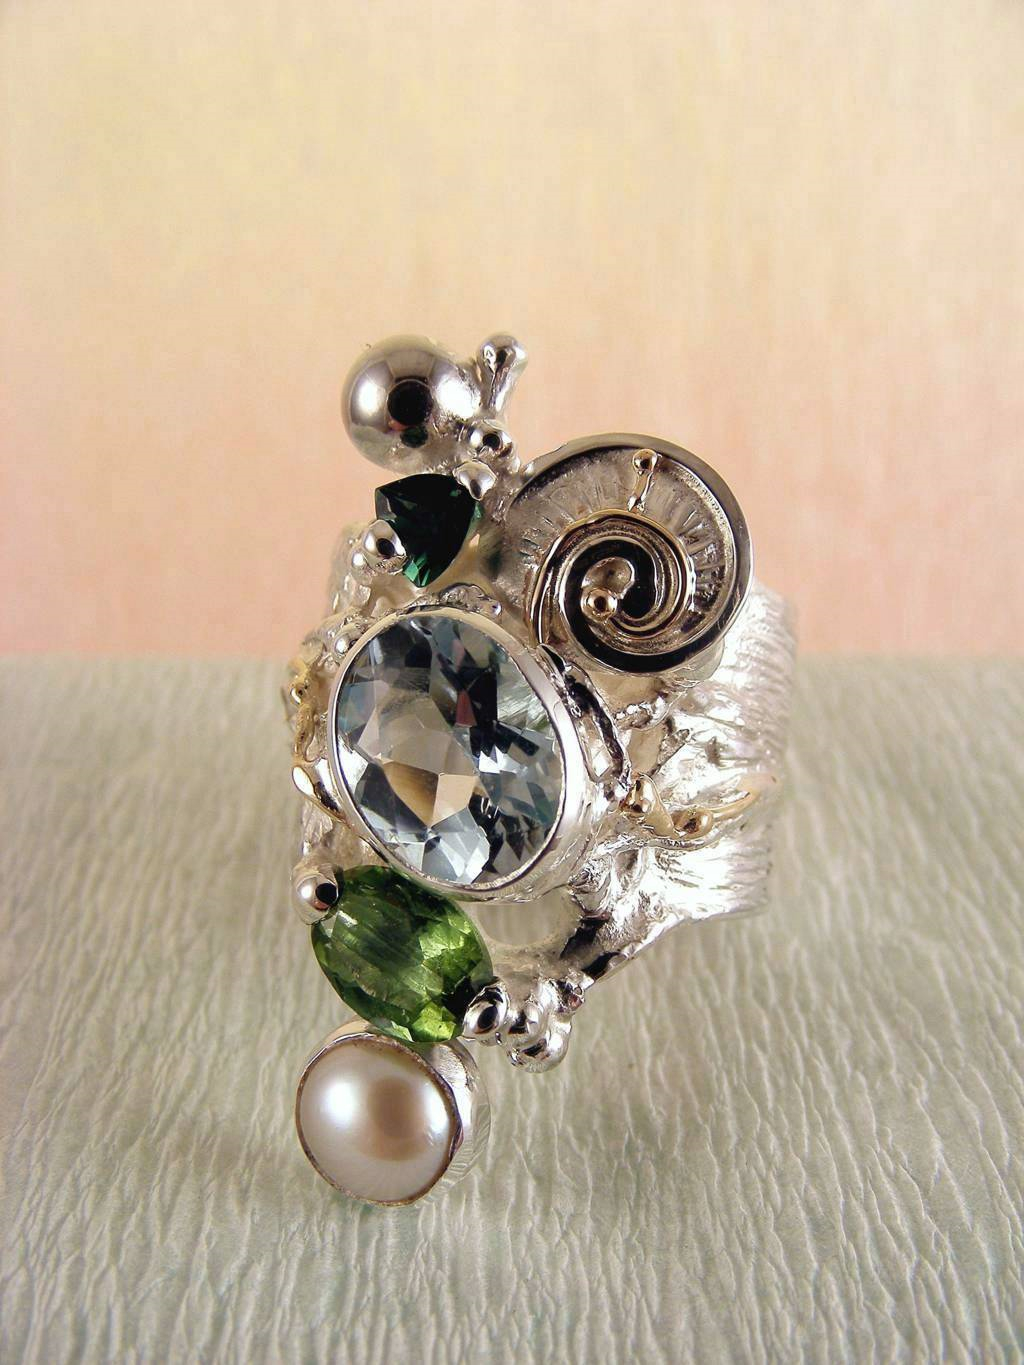 gregory pyra piro art jewellery, silver and gold jewellery with gemstones, gold and silver jewellery with gemstones and pearls, Band #Ring 1441